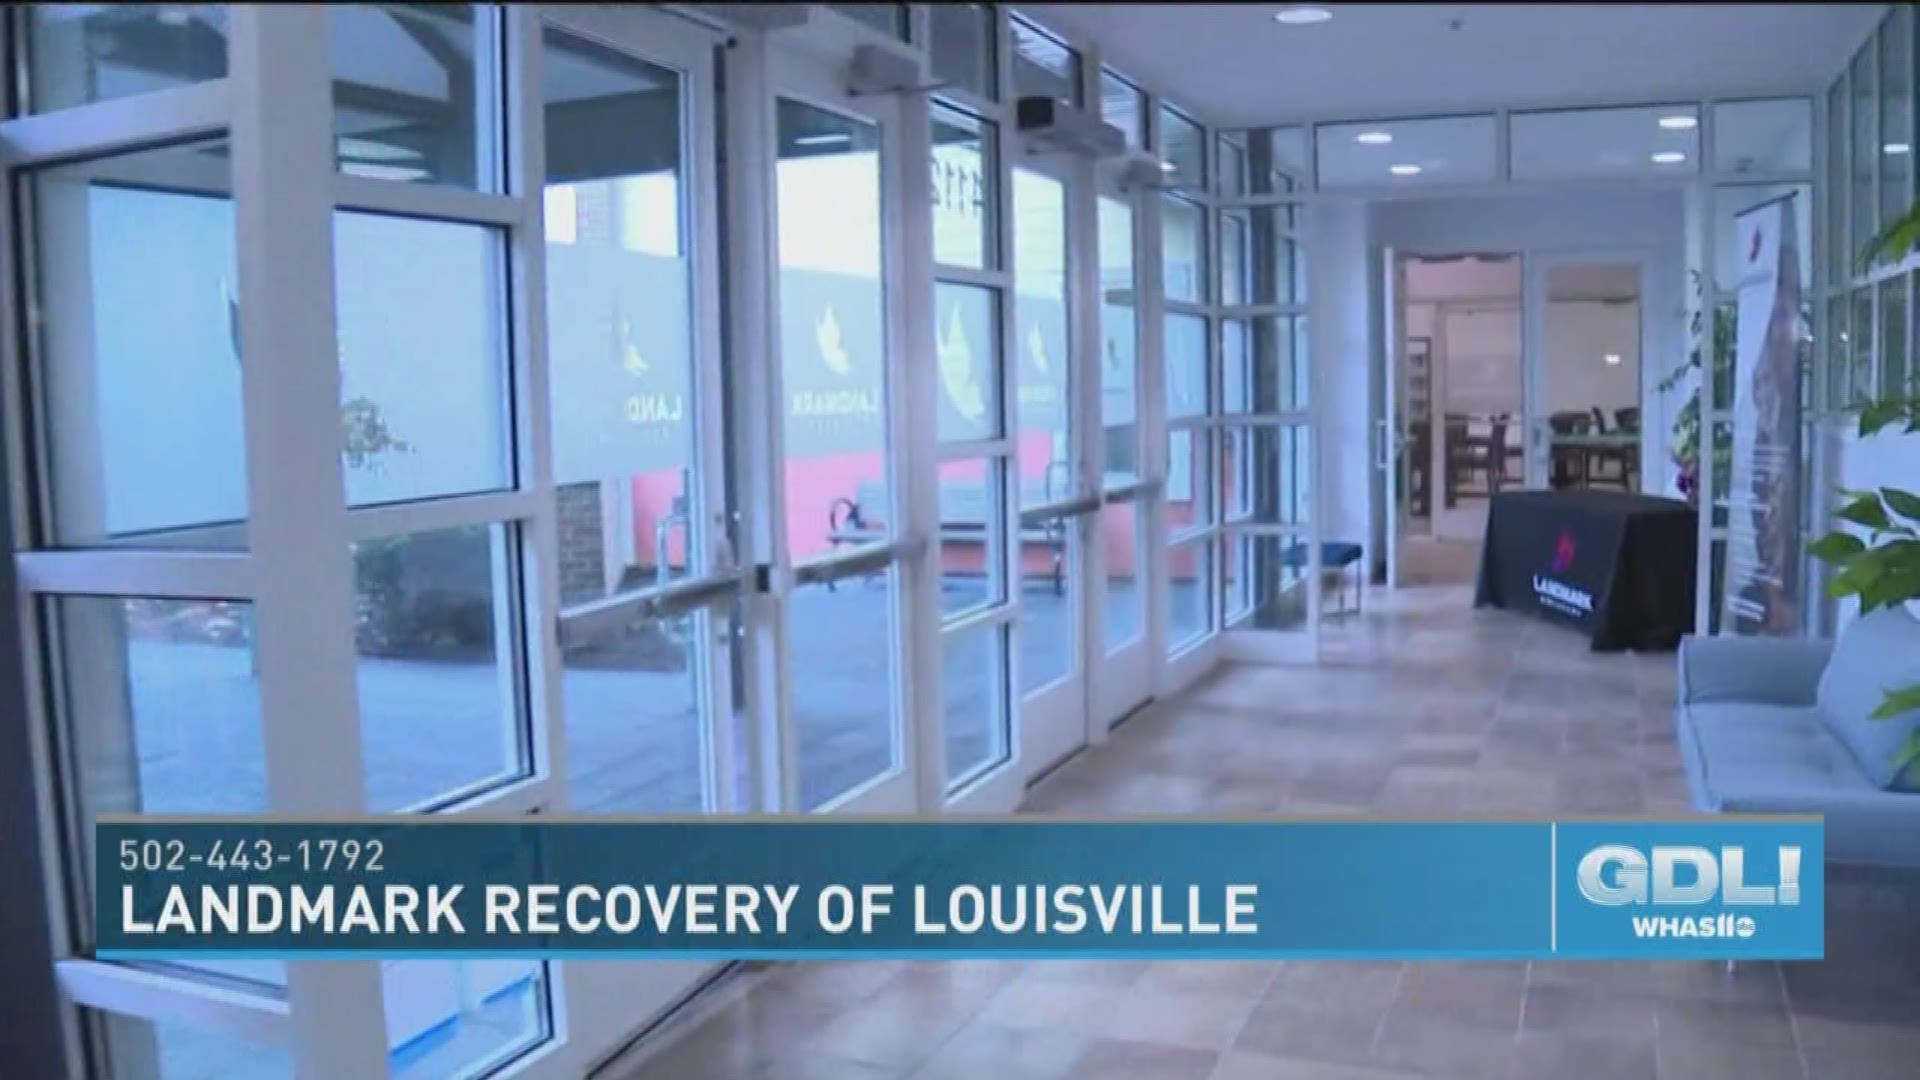 Landmark Recovery of Louisville is a 60 bed facility located at 4418 Malcolm Avenue in Louisville, KY. Go to landmarkrecovery.com for more information.